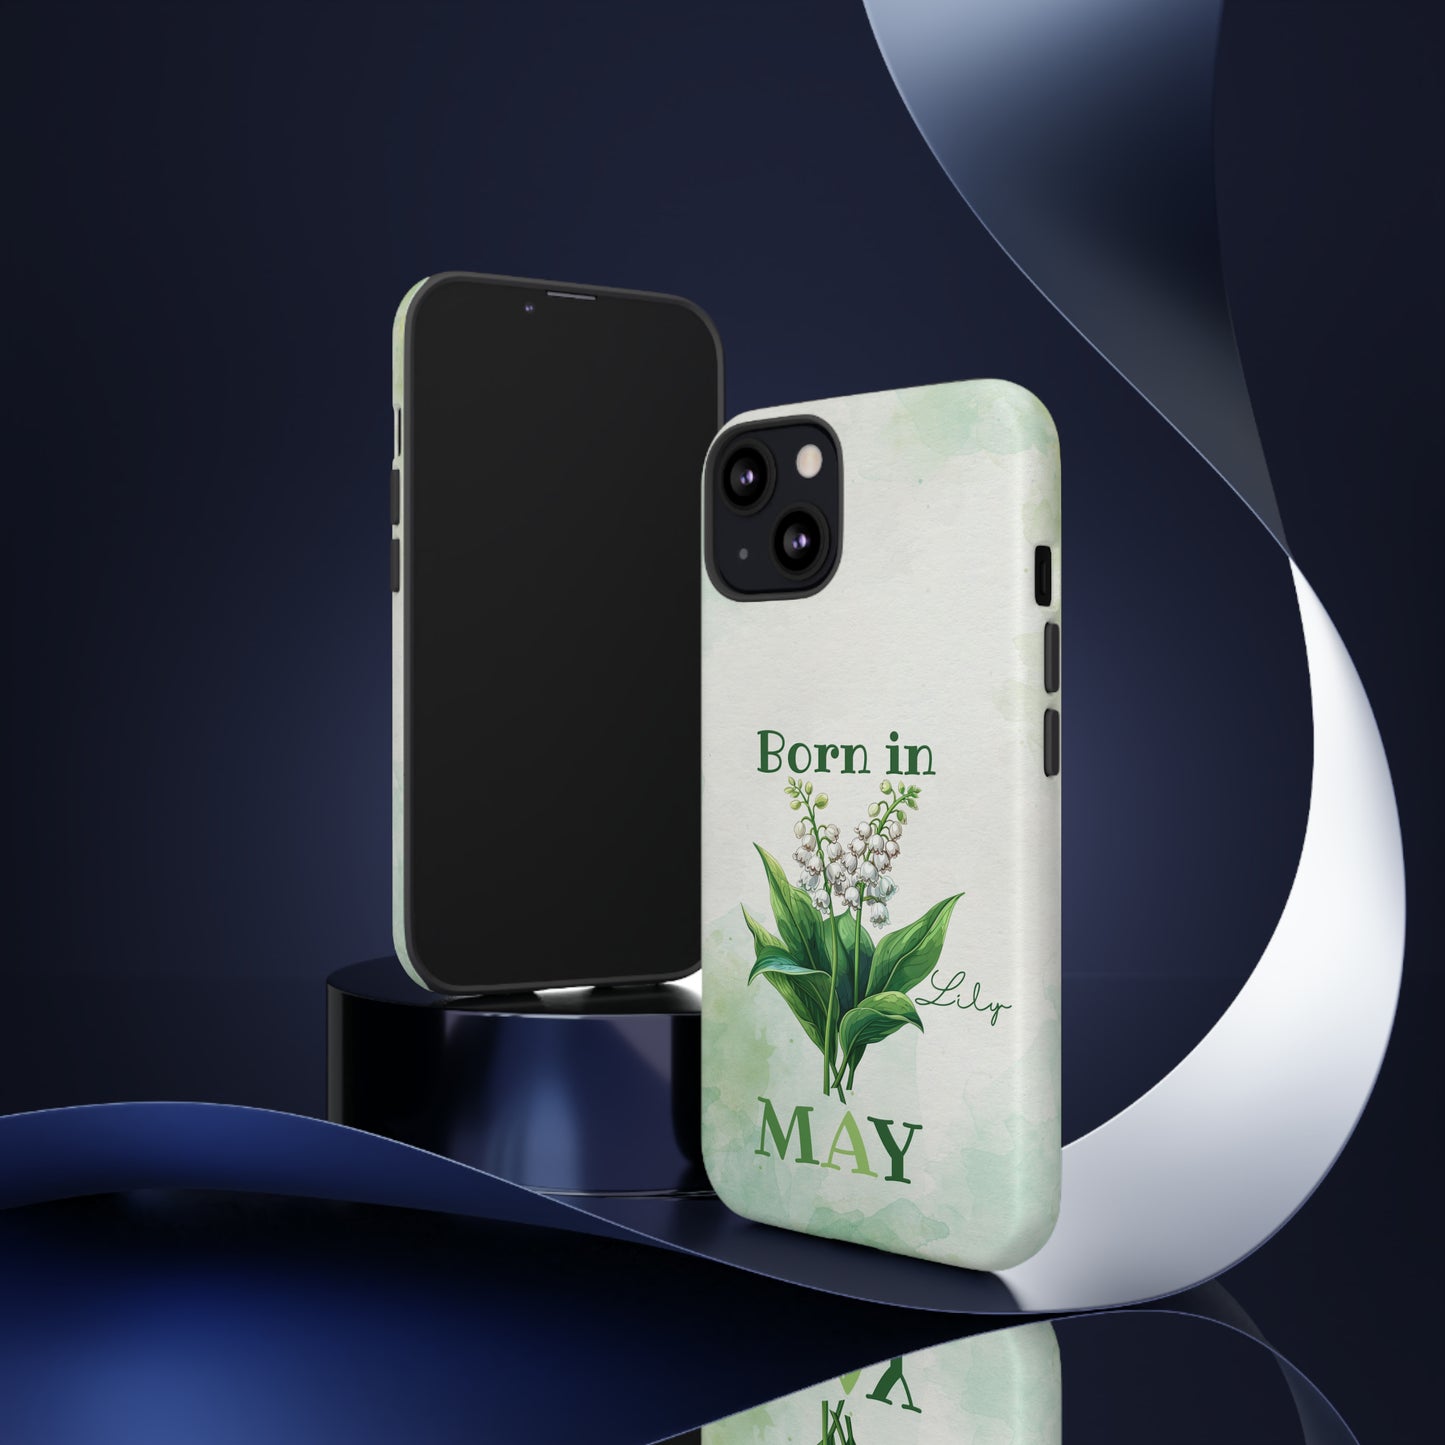 Born in May IPhone Case, May Birthday, Lily Flower